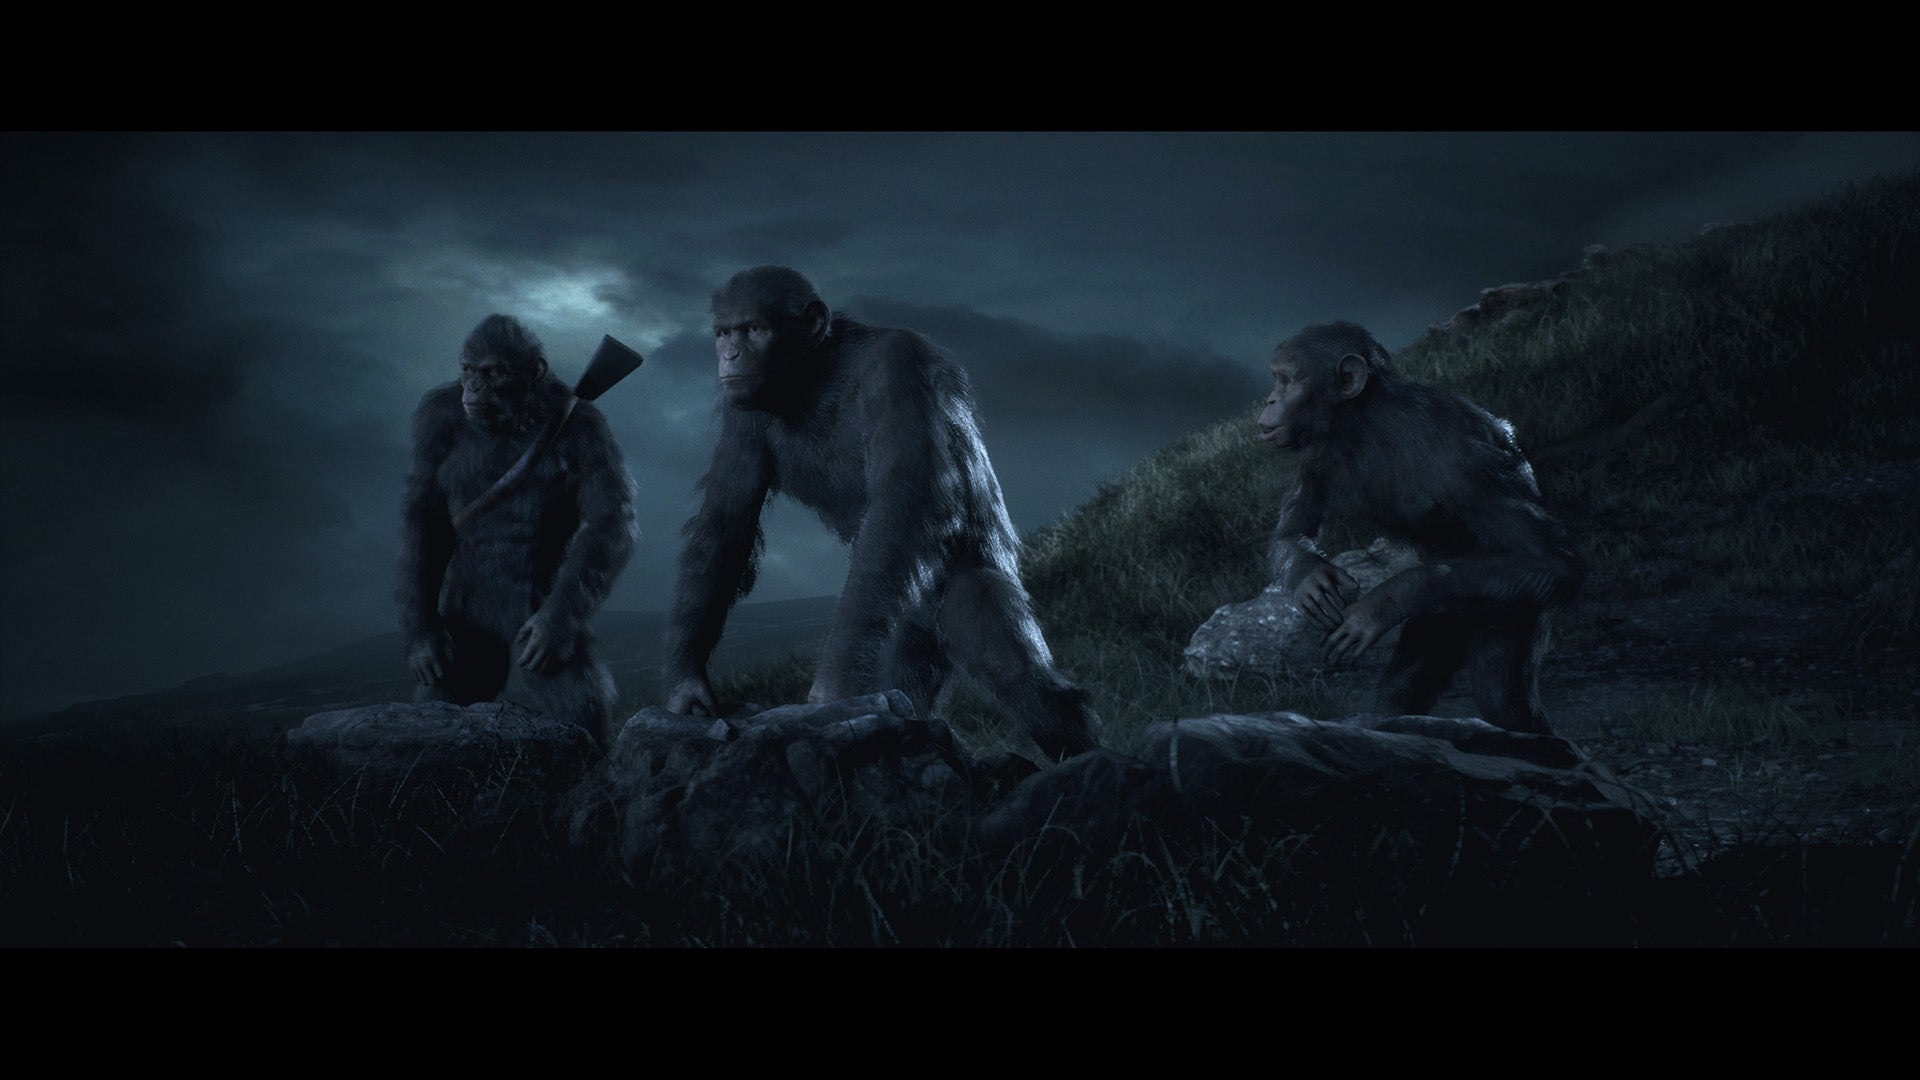 Three apes from a scene in Planet of the Apes game.